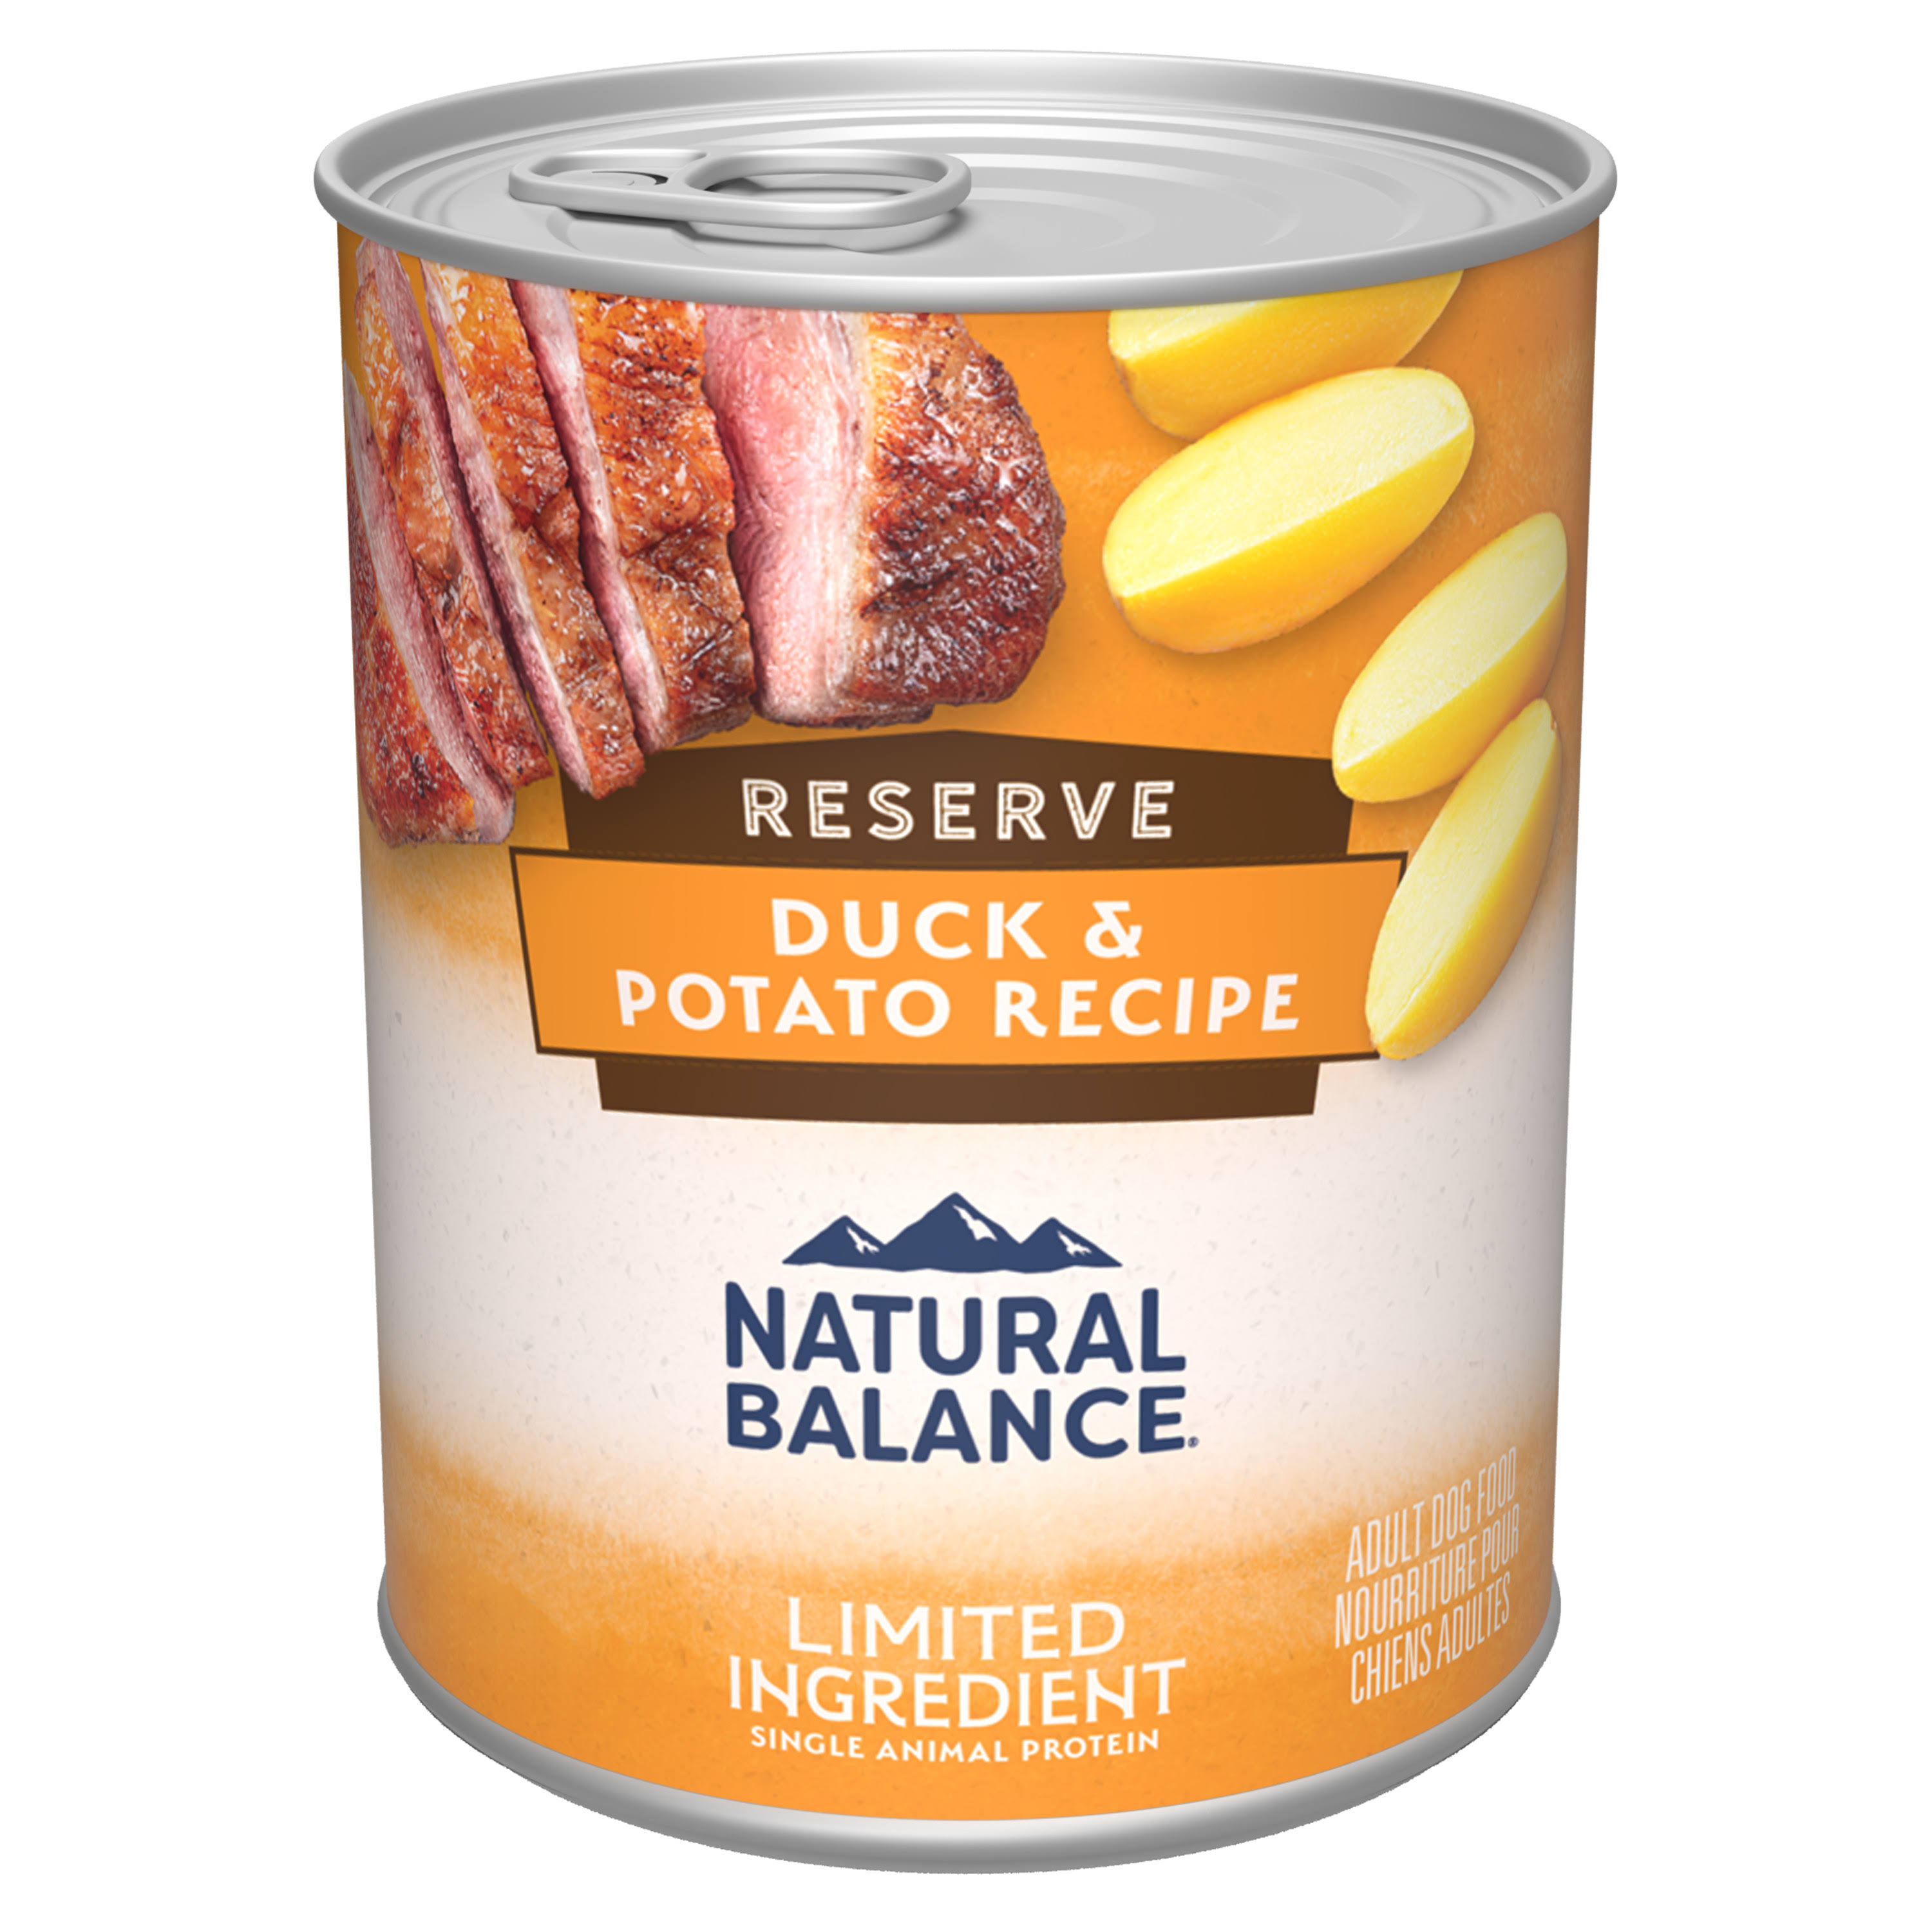 Natural Balance Limited Ingredient Diets Dog Food - Duck & Potato